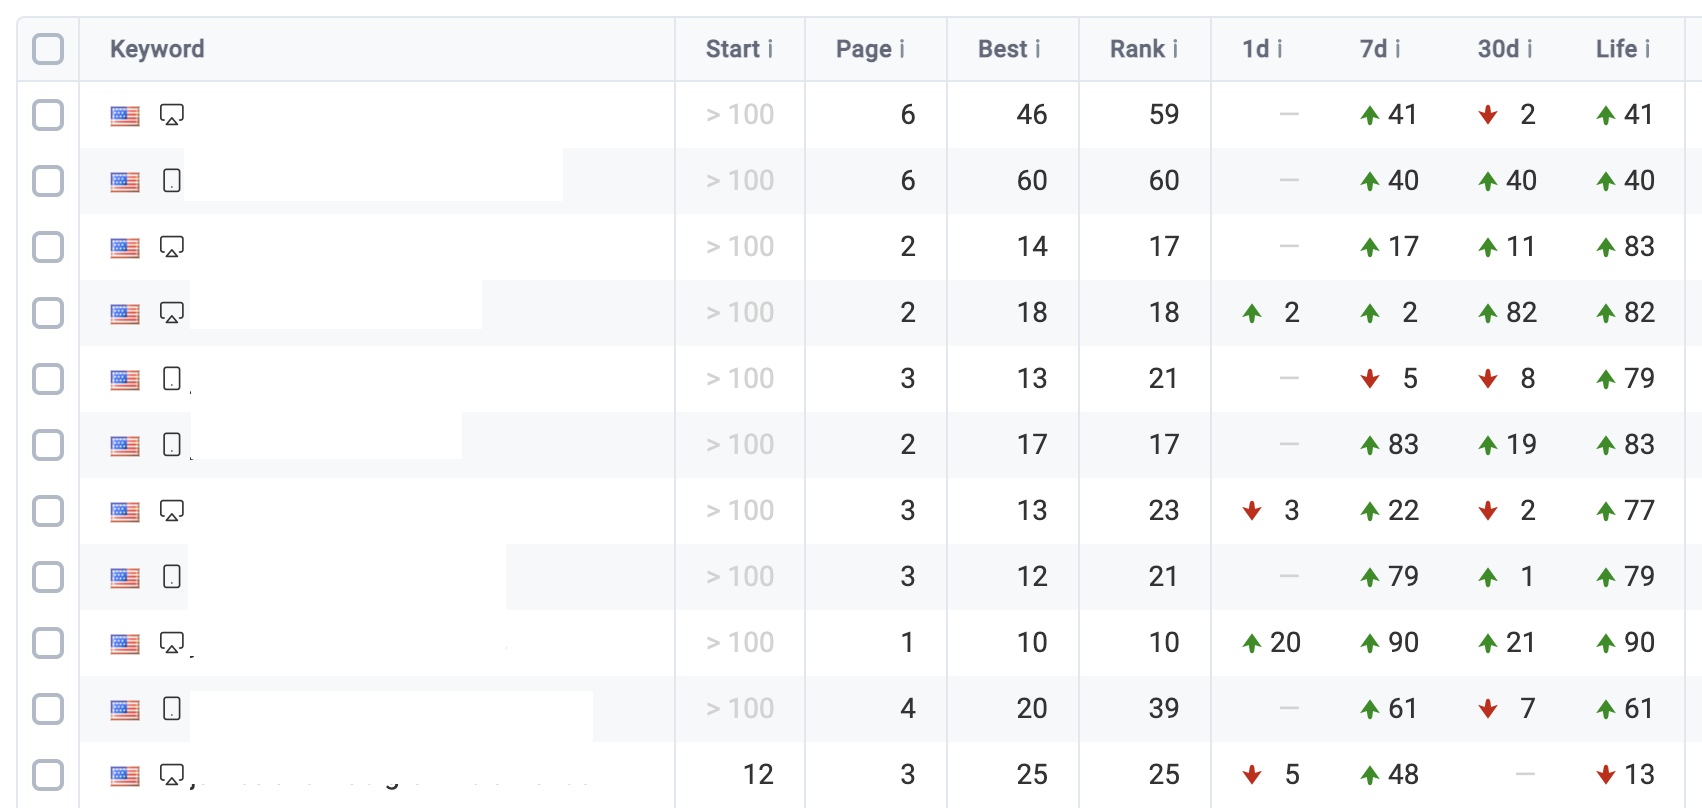 improving rankings with backlinks